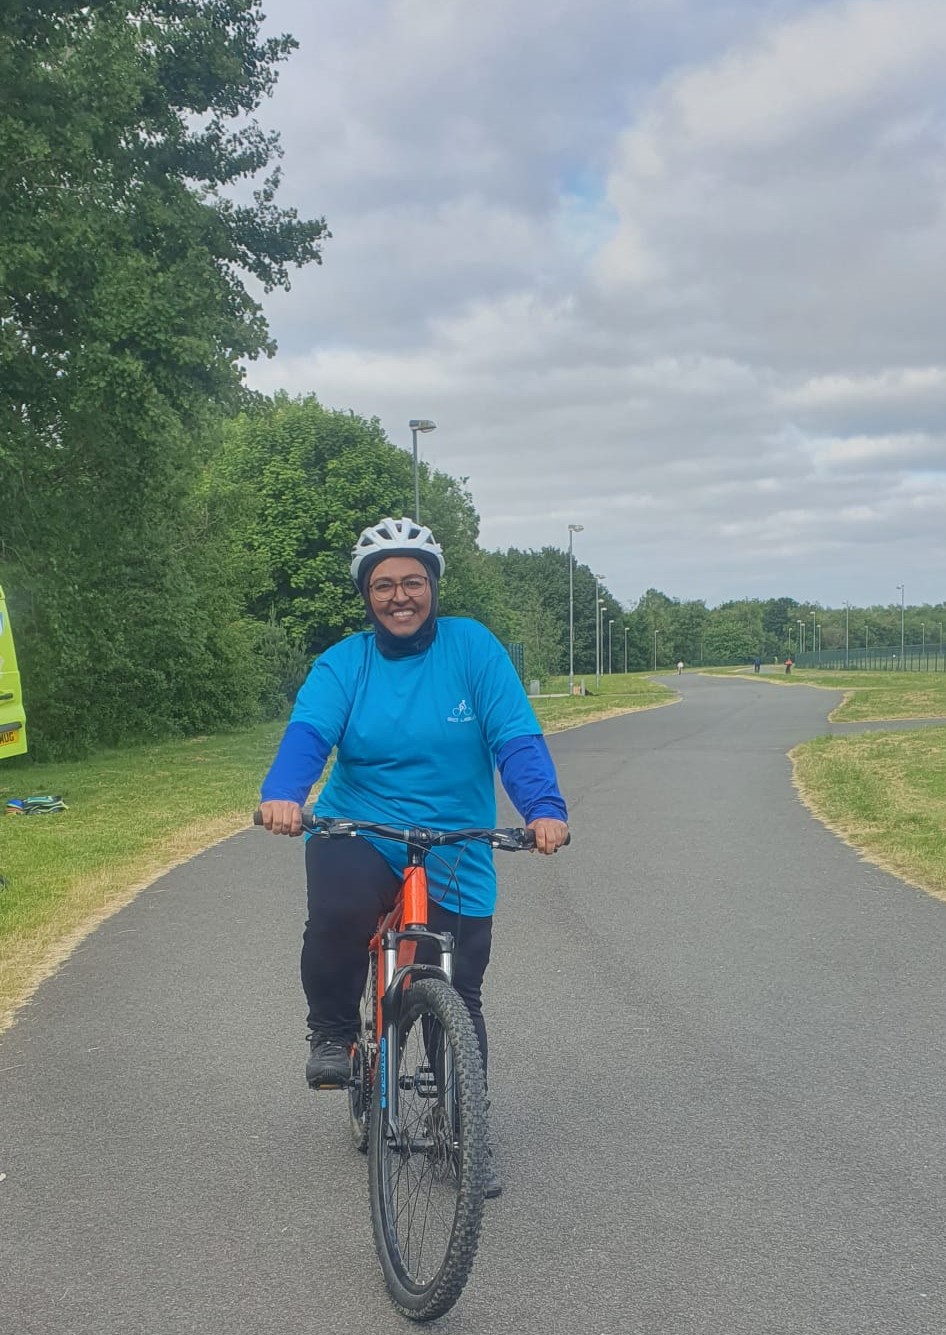 Naida smiling on her bicycle. She is wearing a bright blue t shirt and a white helmet.